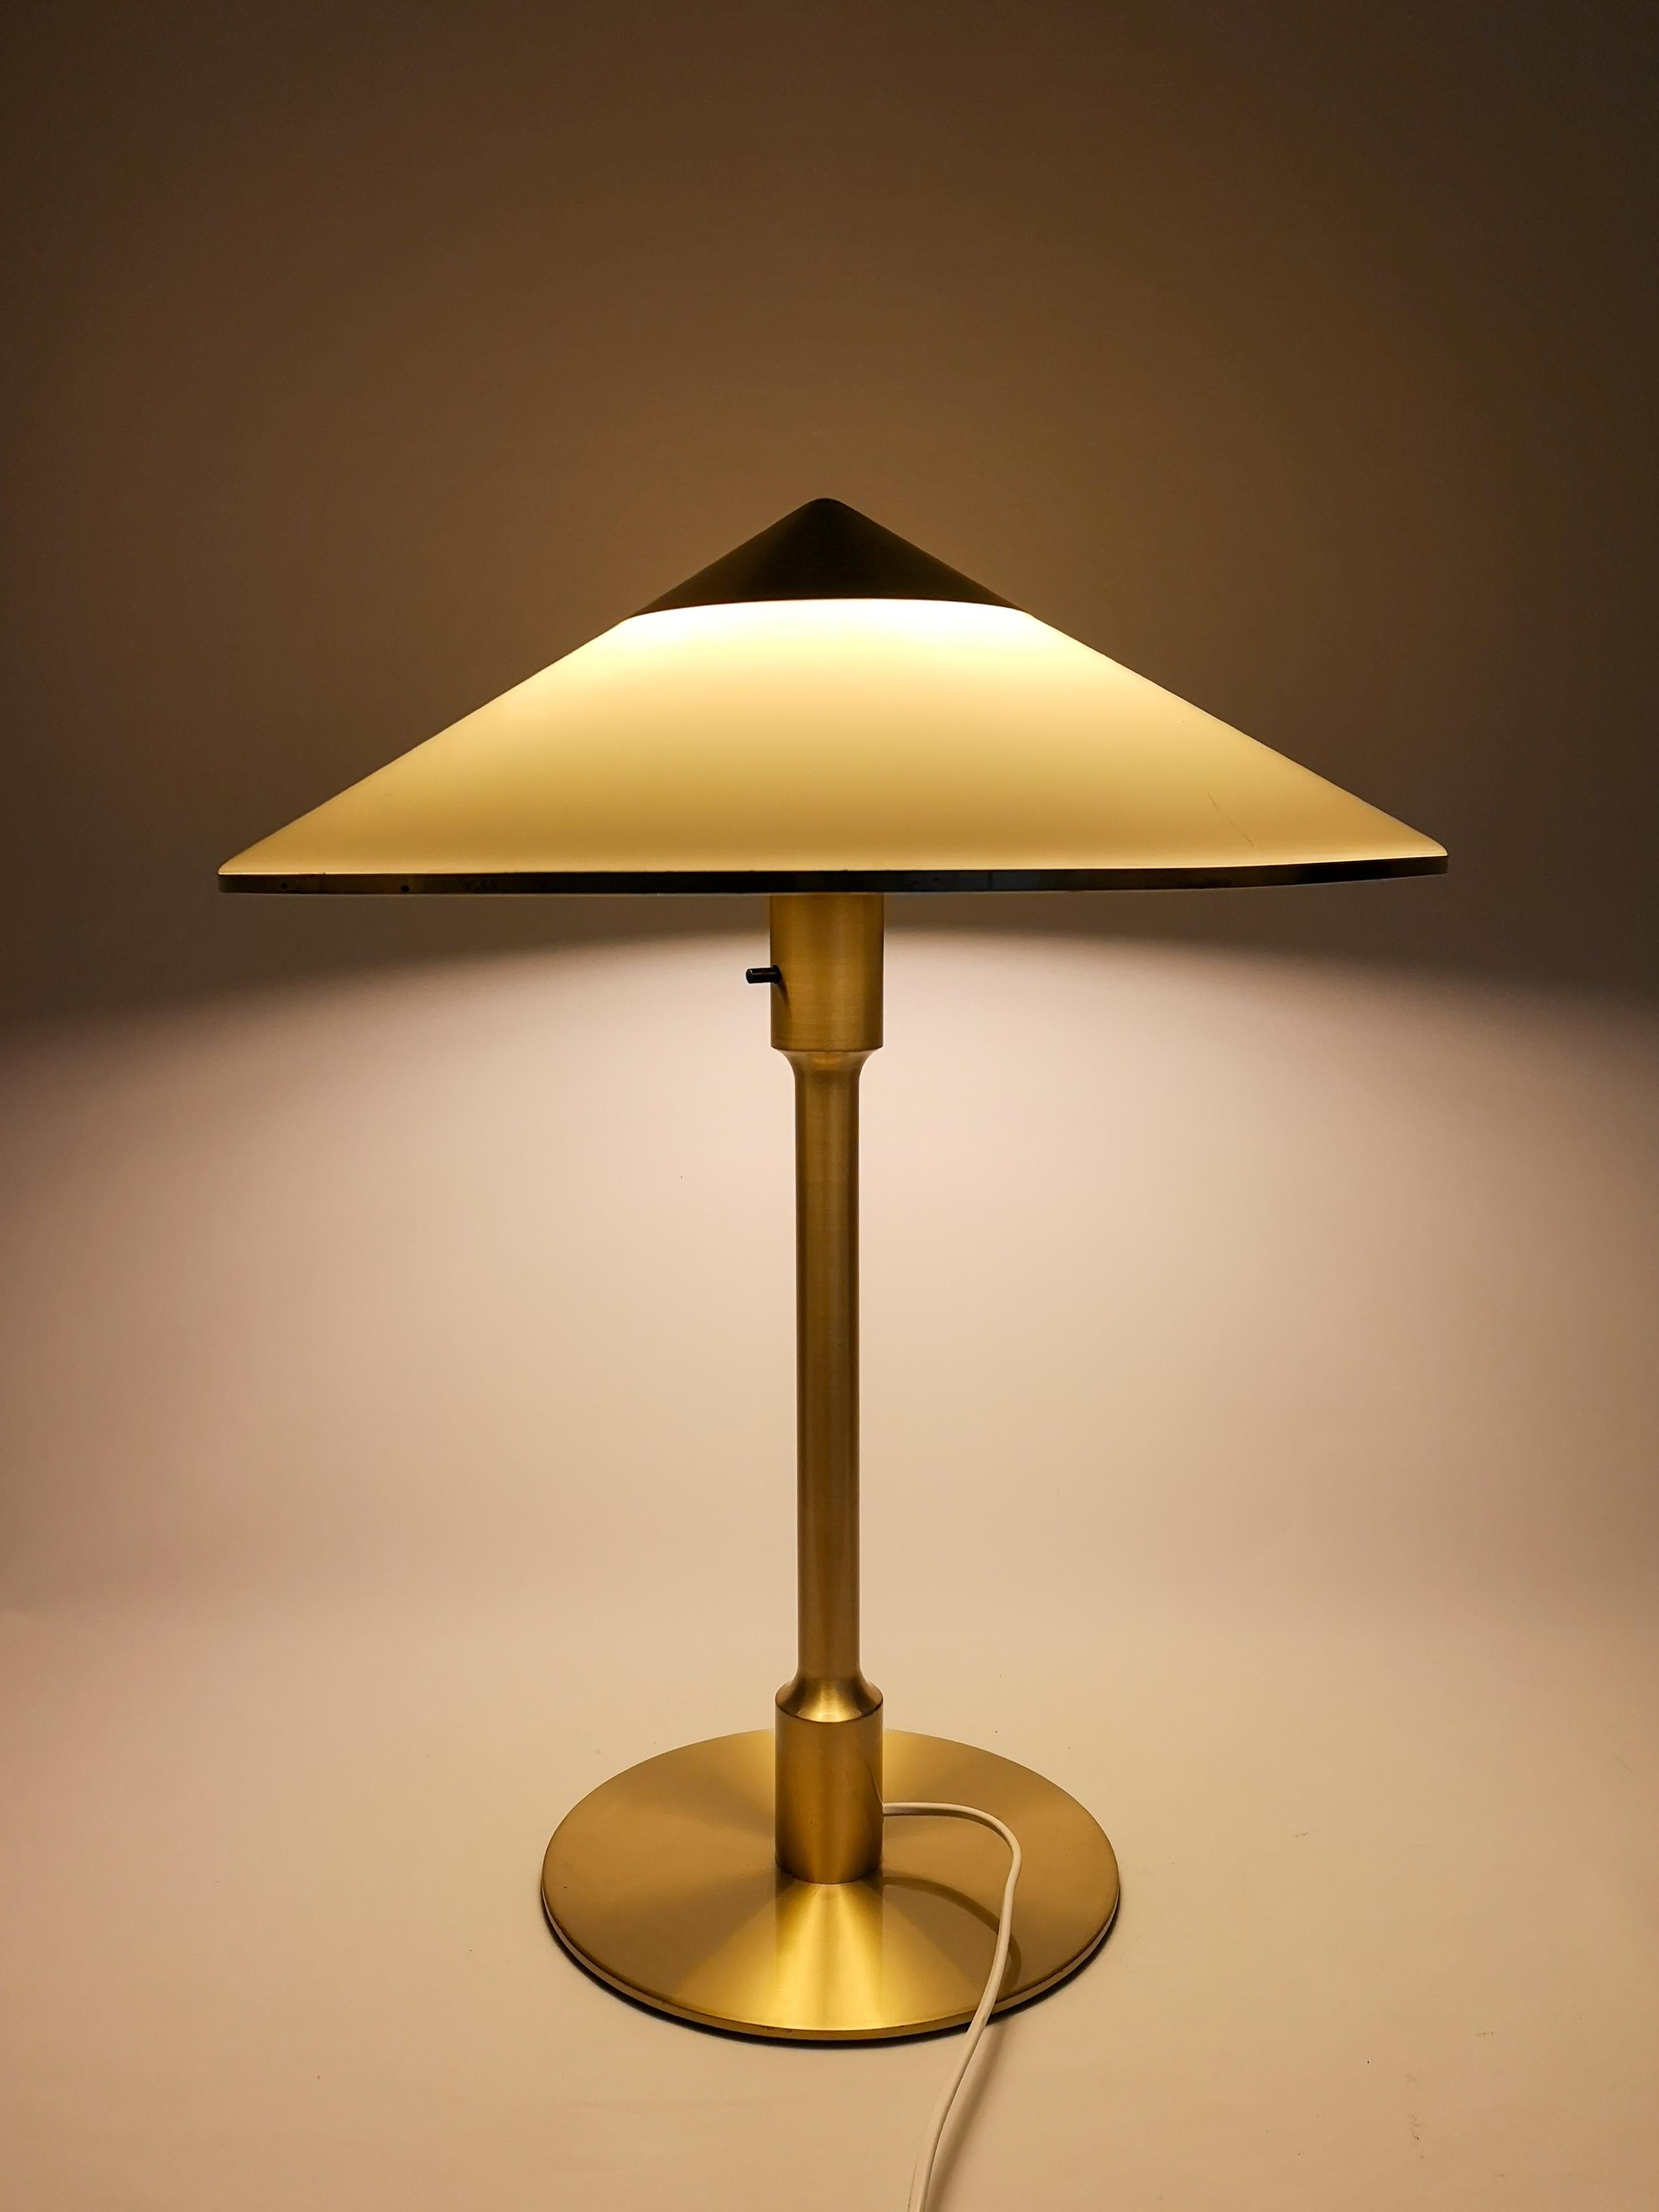 This stunning table lamp was produced in Denmark in 1950s at Fog & Mørup. This iconic lamp called 